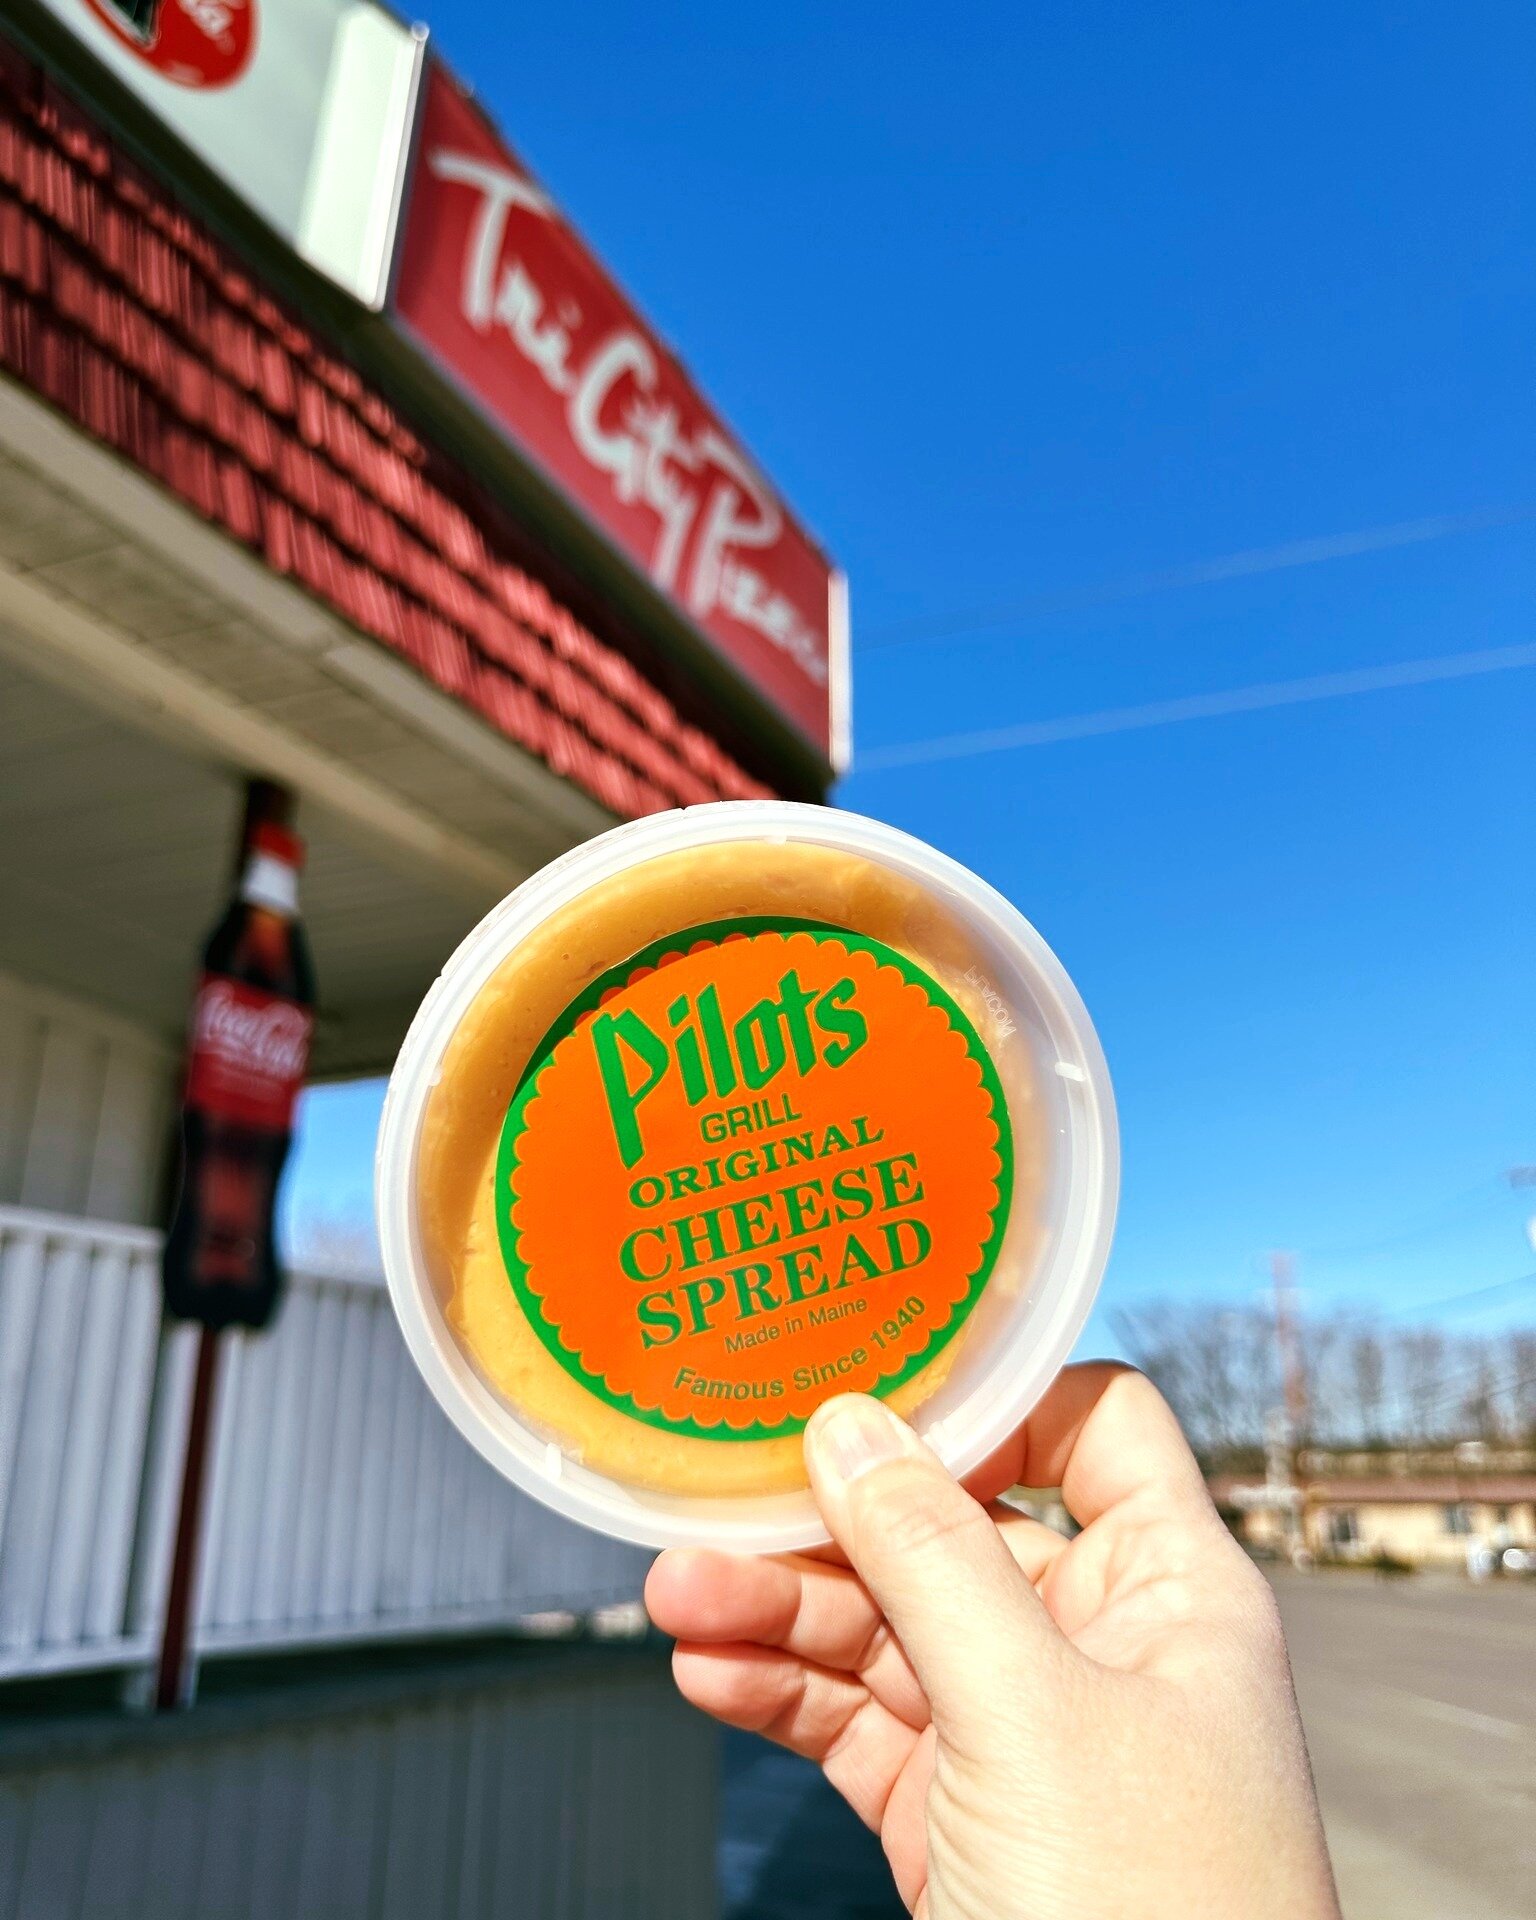 Pilot's Cheese Spread has just landed at Tri City Pizza! So grab a slice and elevate your pizza party to new levels of cheesy delight! 🍕🧀 #PizzaParty #bangorme #cheeselover